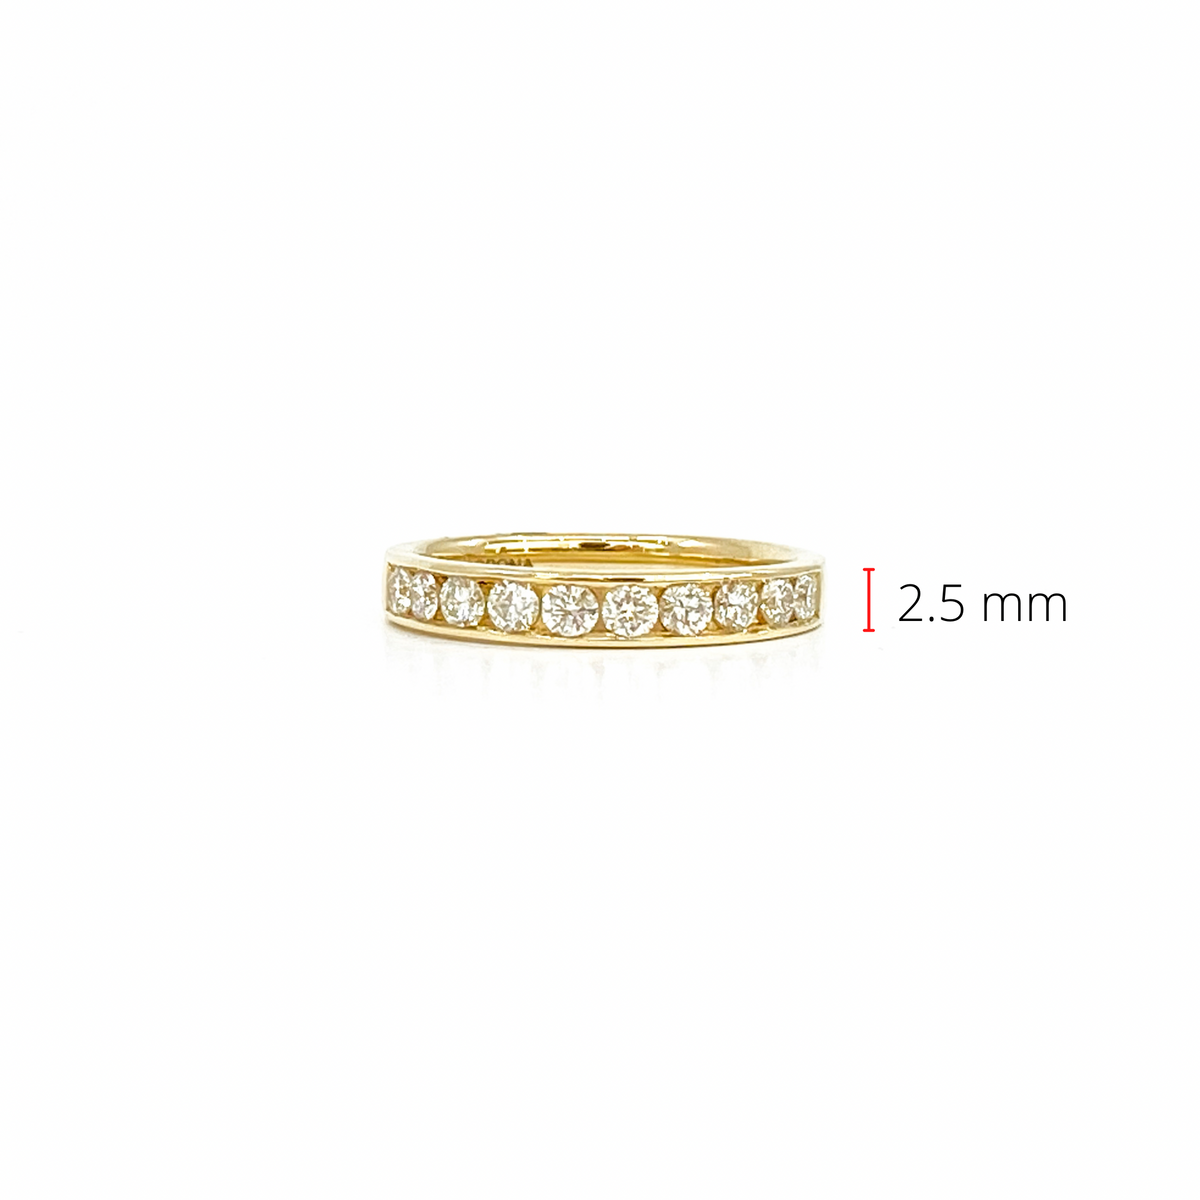 14K Yellow Gold 0.25cttw Diamond Anniversary Channel Set Ring / Band, size 6.5